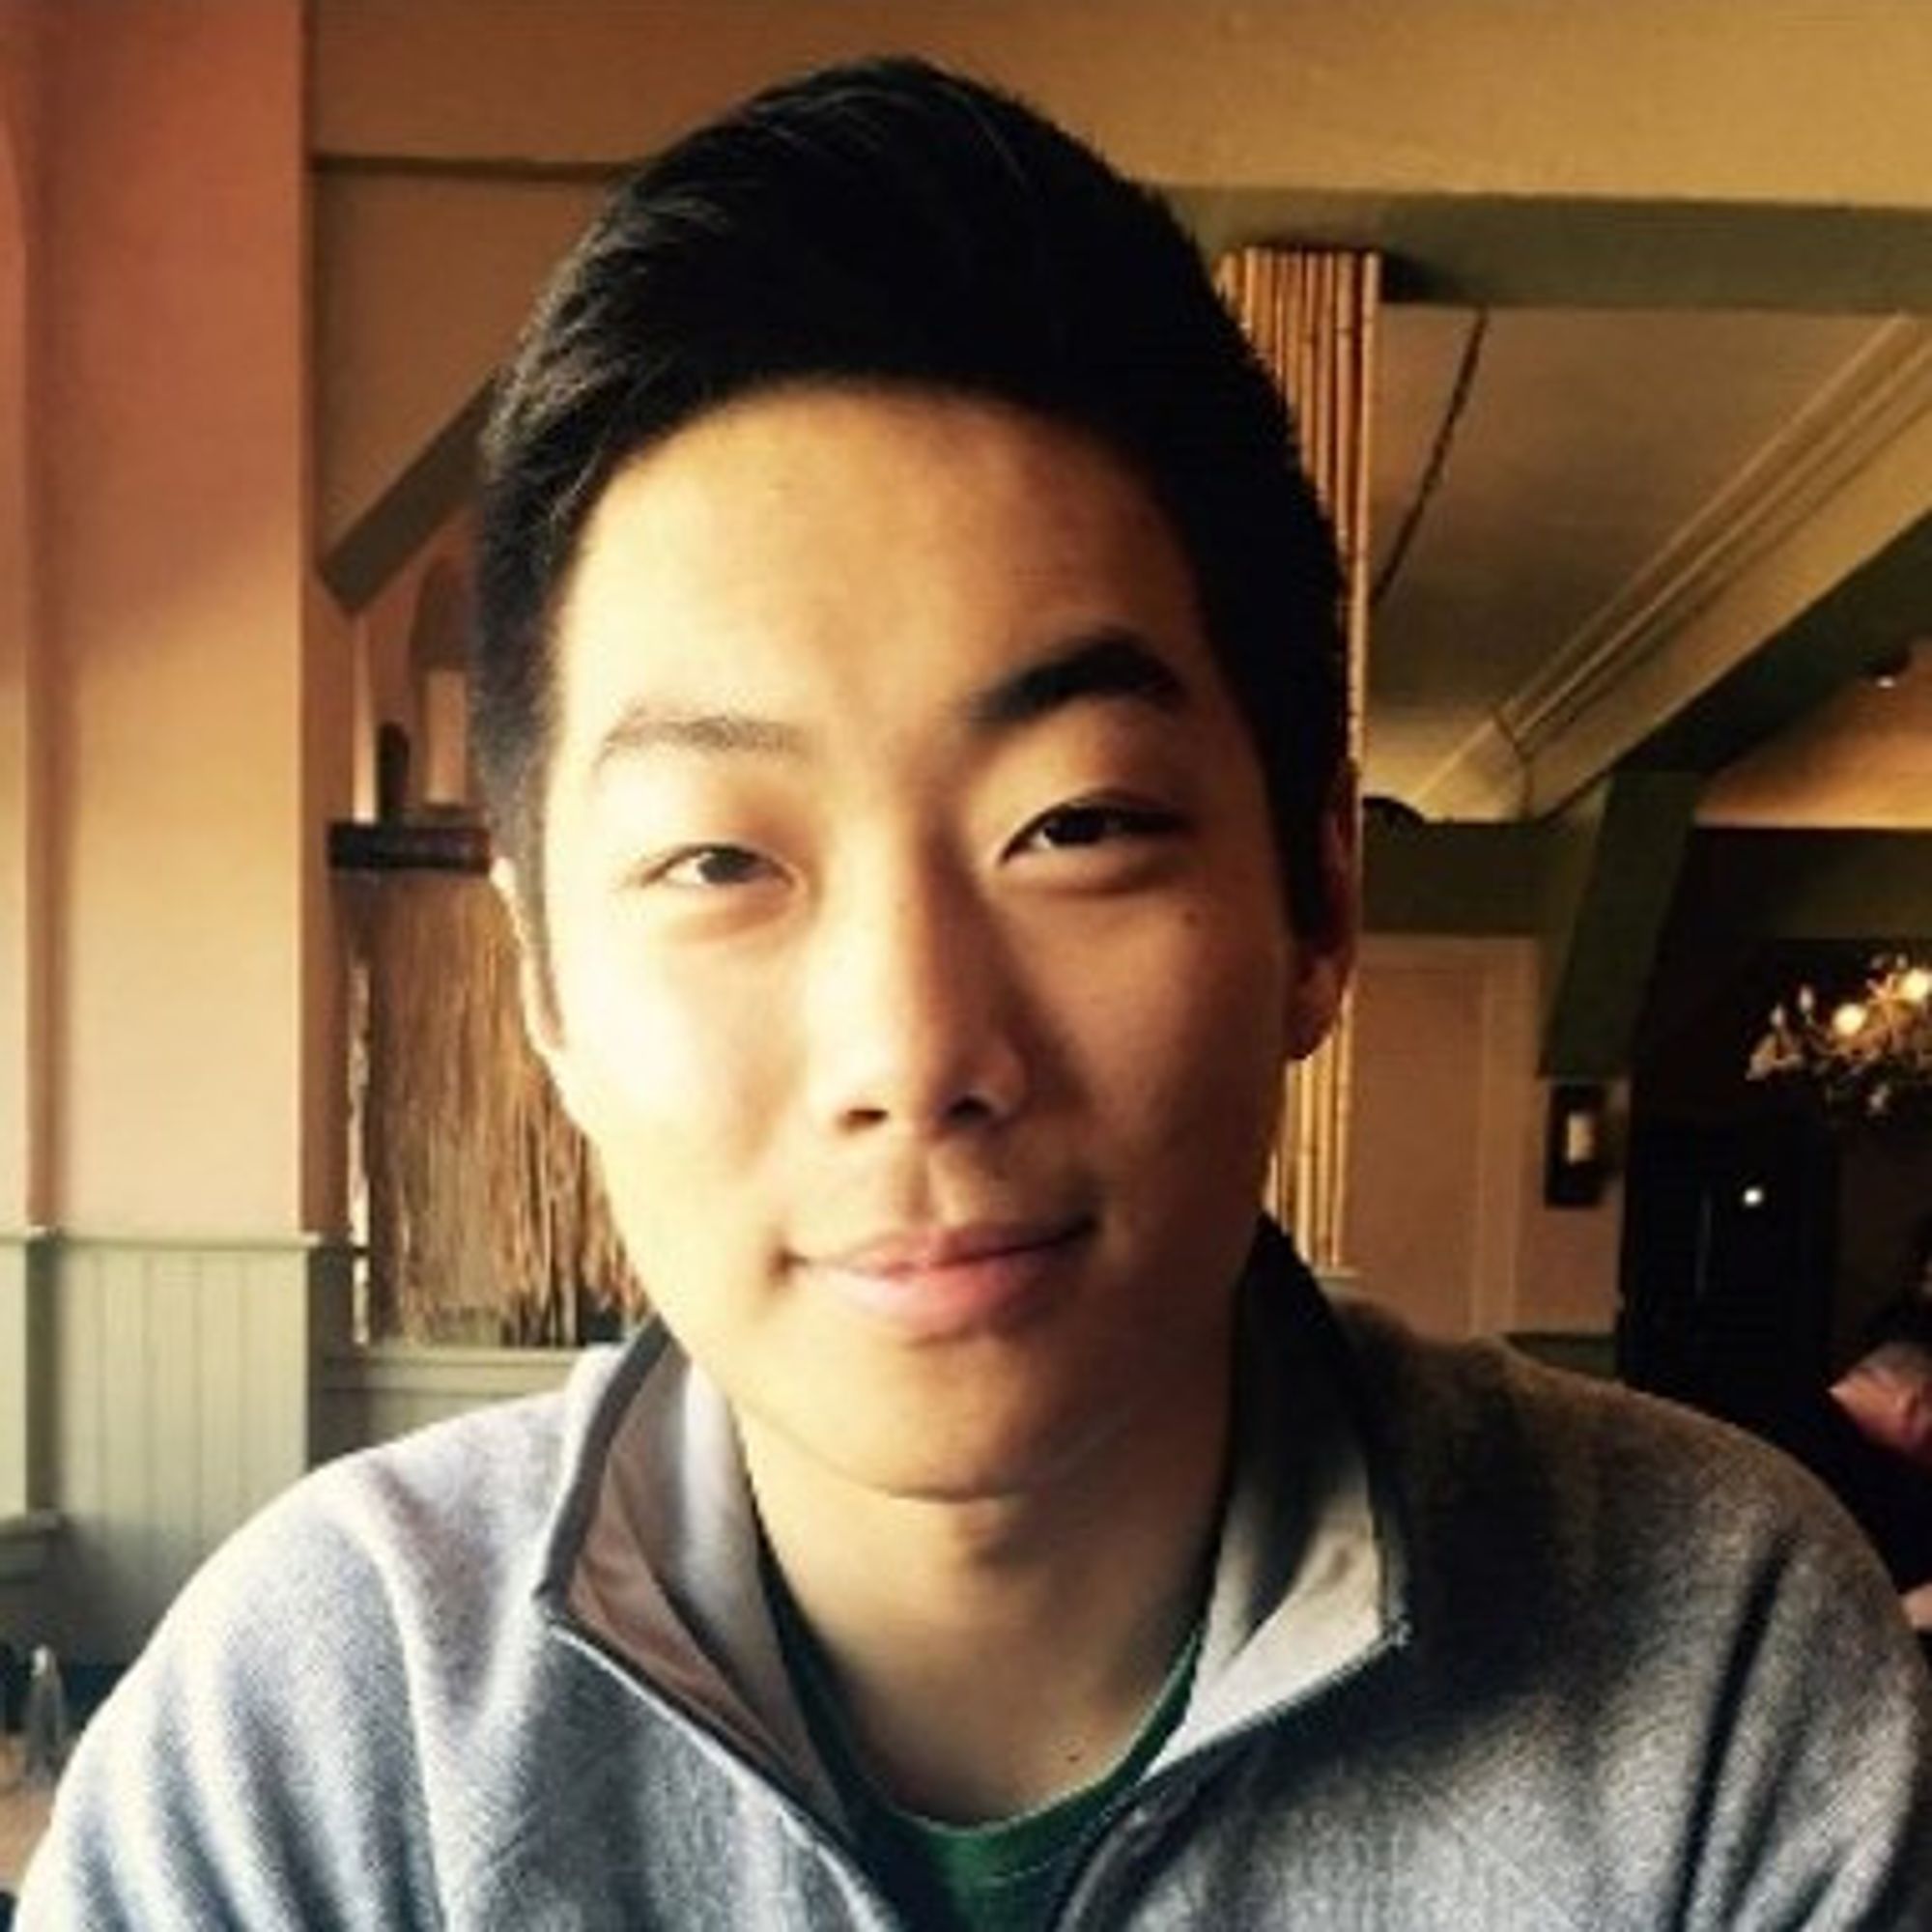 Dan Li
Senior Product Manager
Formerly at Faire, Airbnb, and McKinsey • Likes soccer and poker, and slowly getting into golf